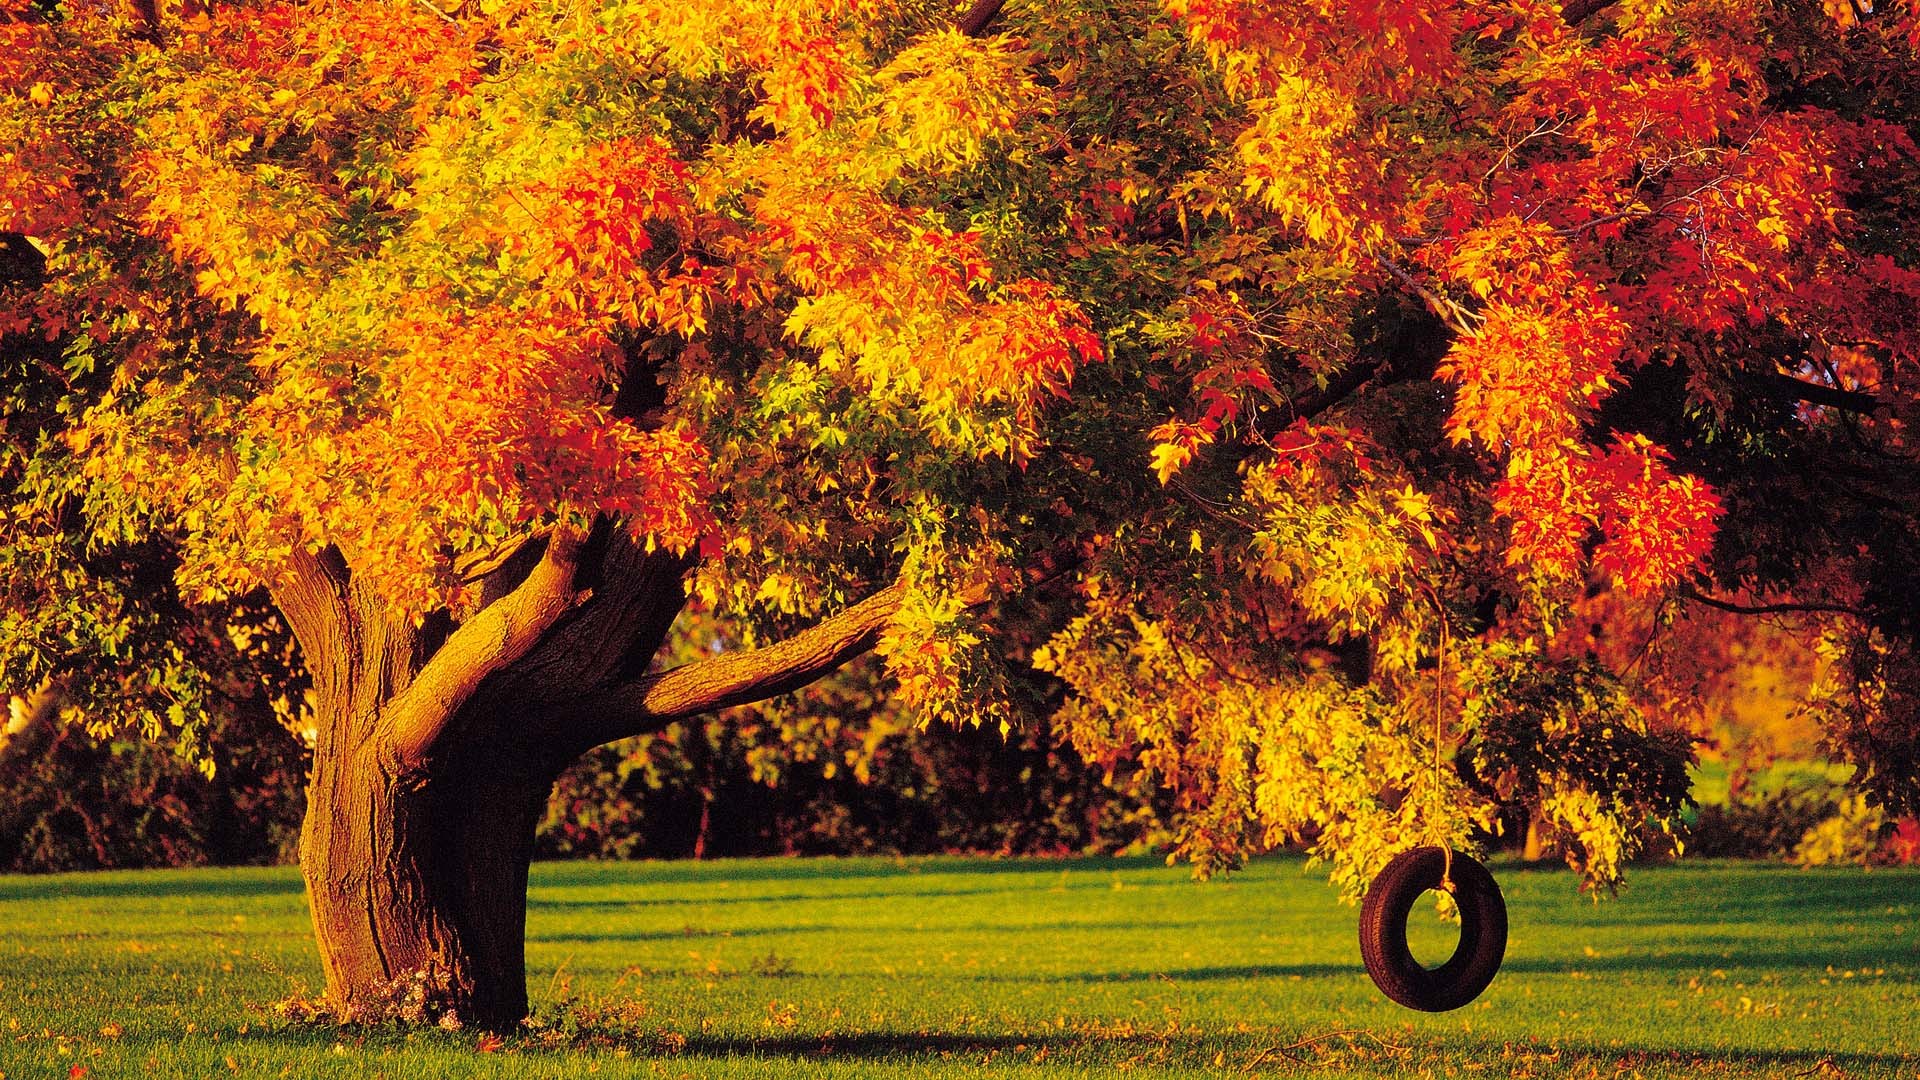 1920x1080 Autumn Tree with Tire Swing